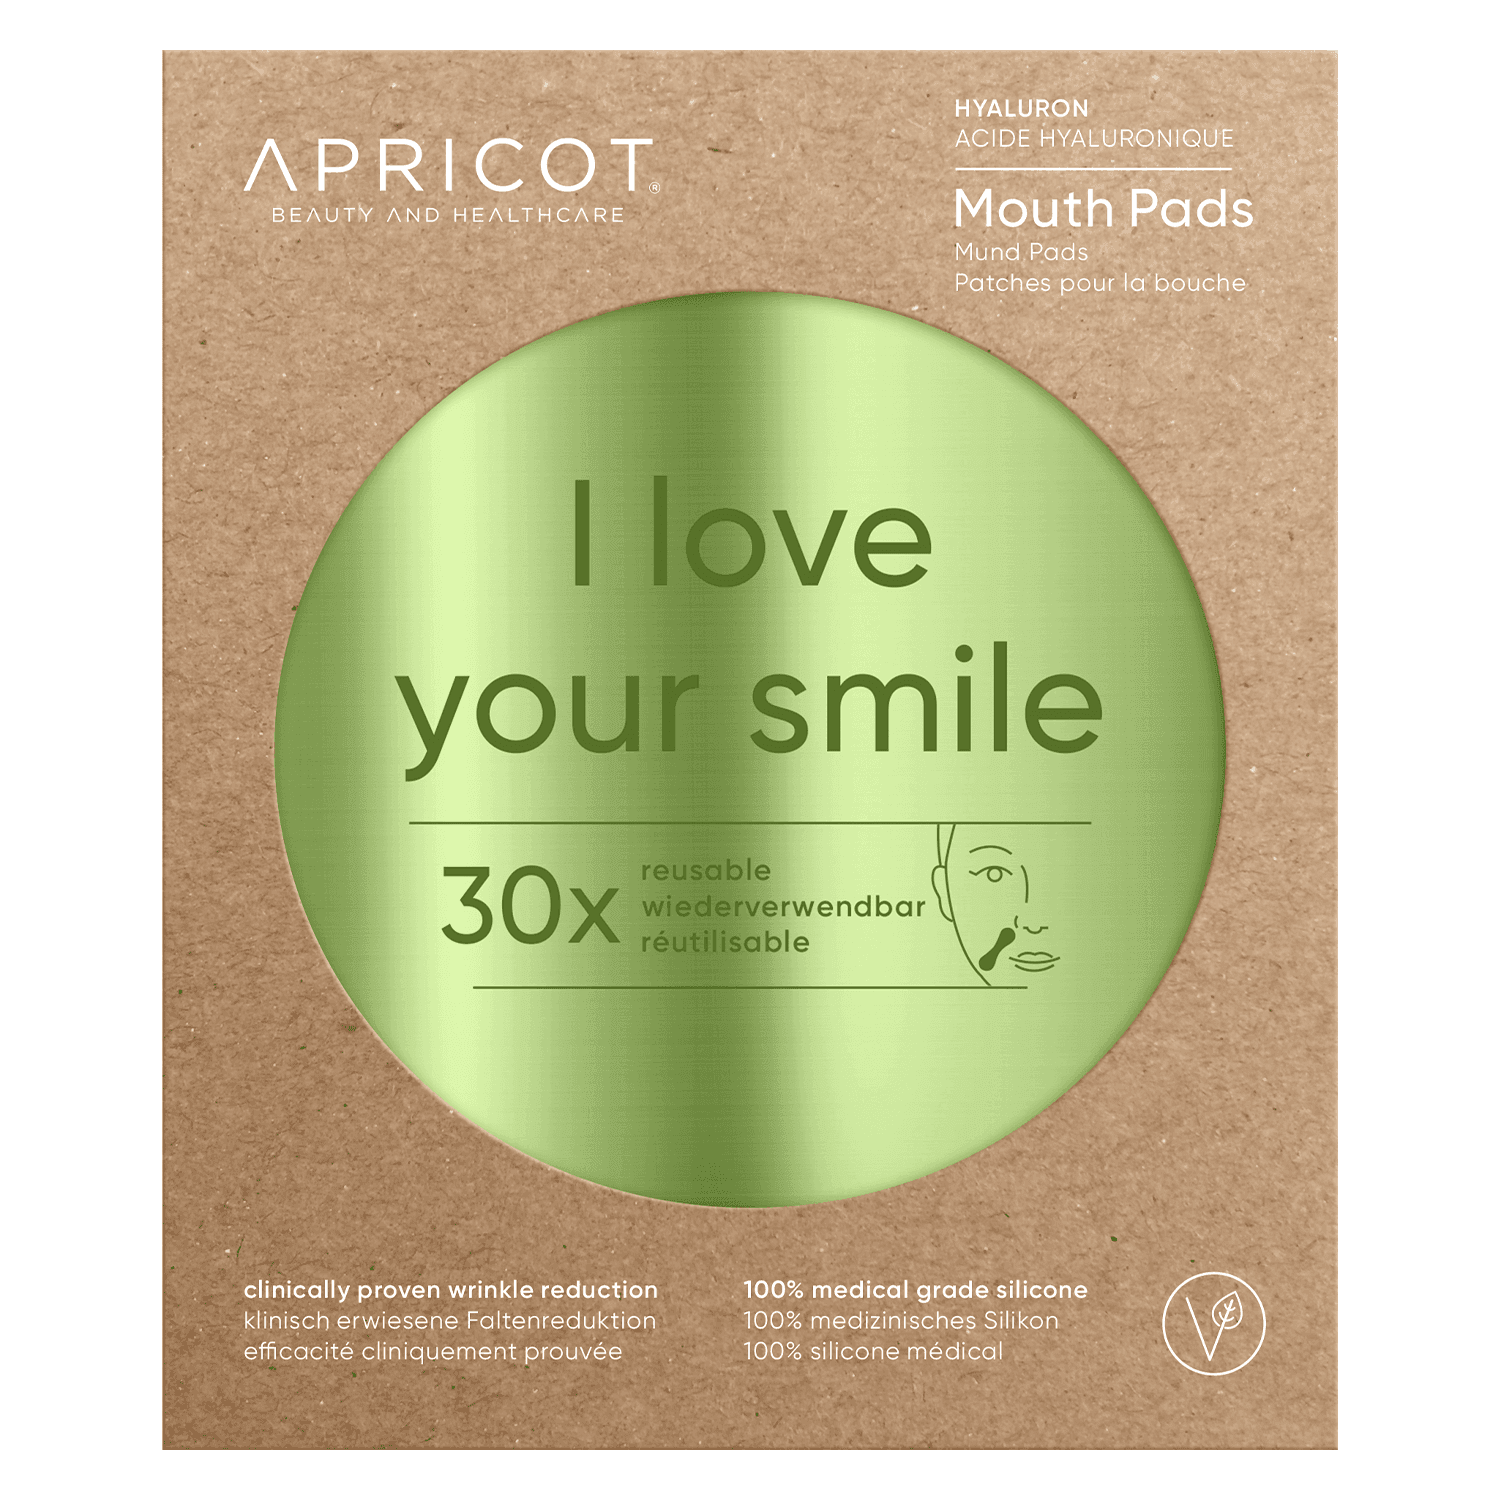 APRICOT - Reusable Mouth Pads I love Your Smile